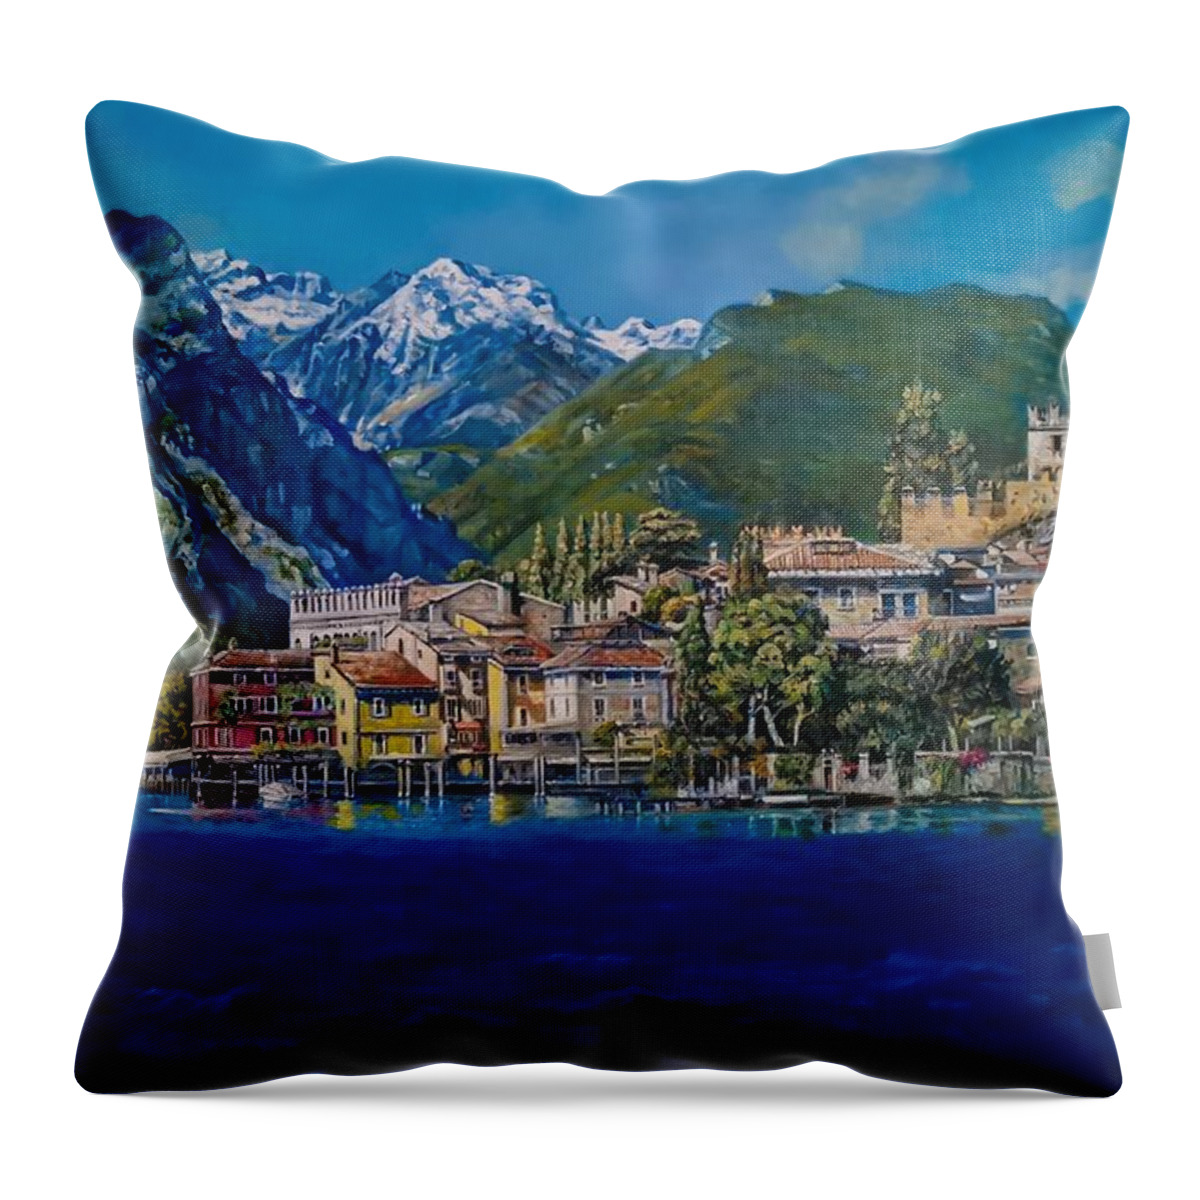 Lakeside View Throw Pillow featuring the painting A colourful town by the lake by Raouf Oderuth